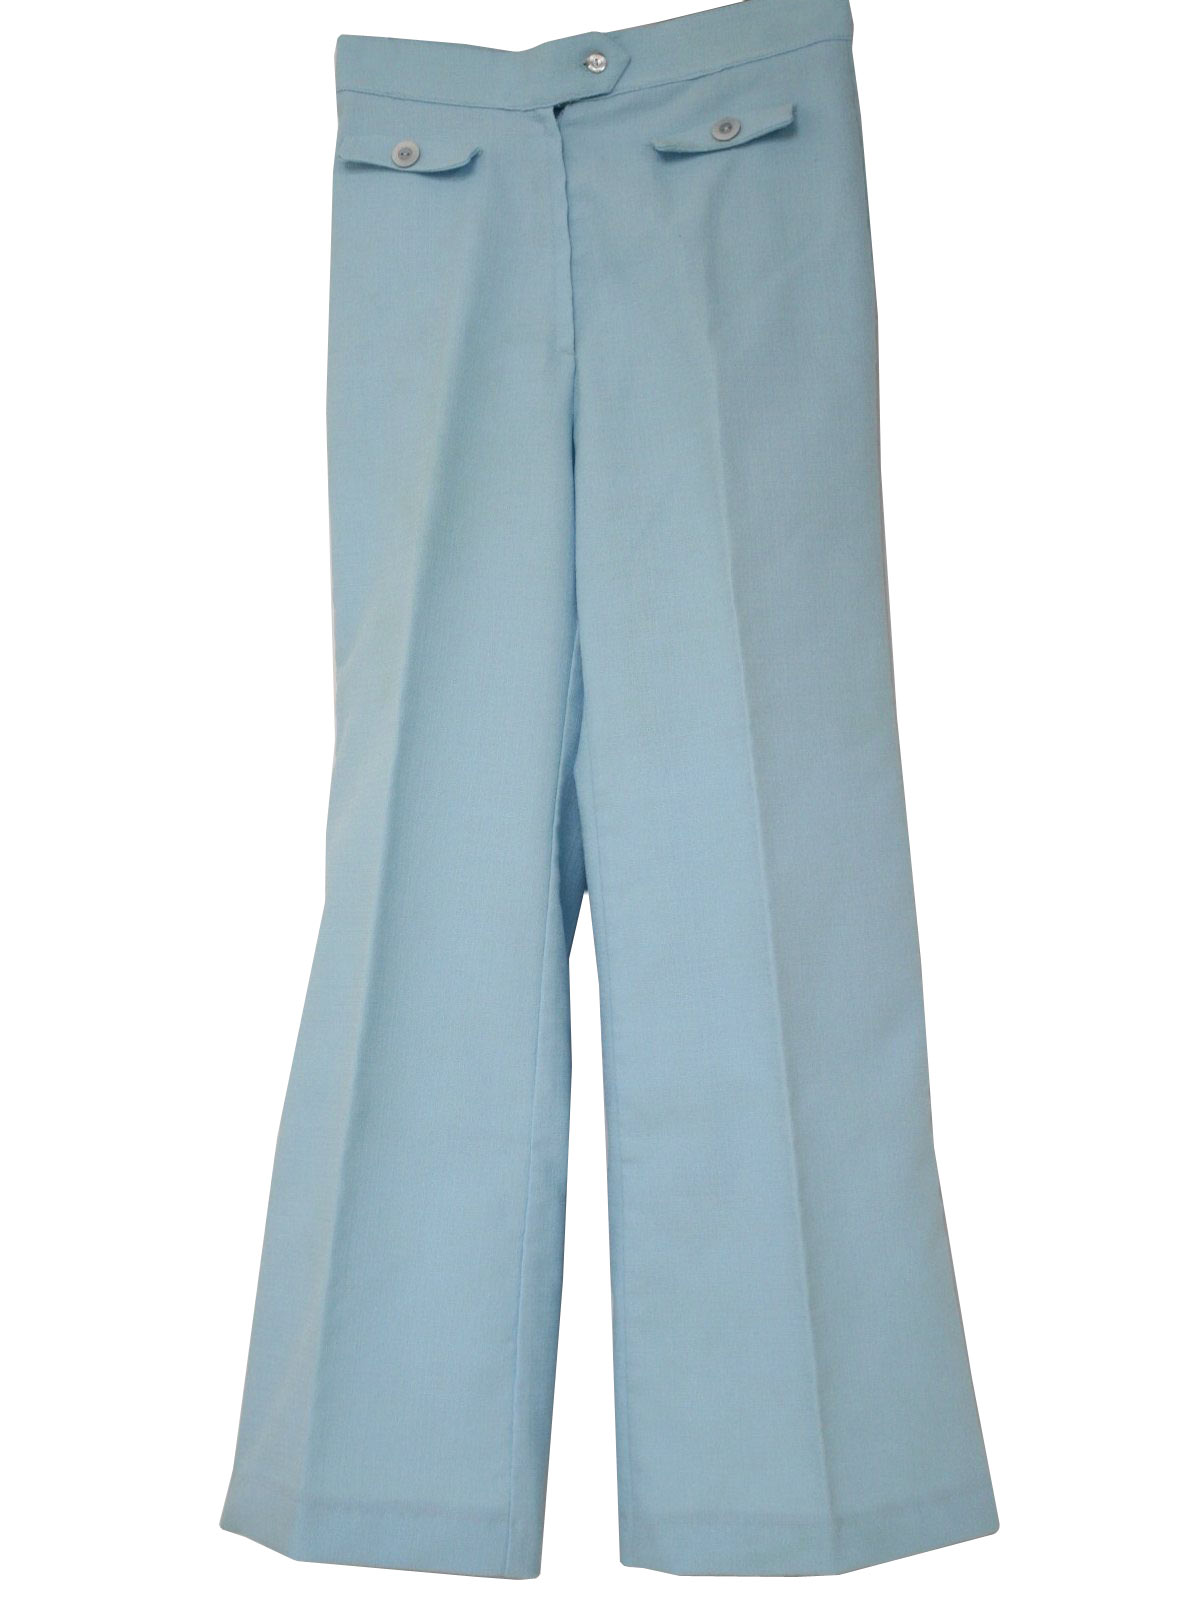 Retro 1970's Bellbottom Pants (JCPenney) : 70s -JCPenney- Womens sky ...